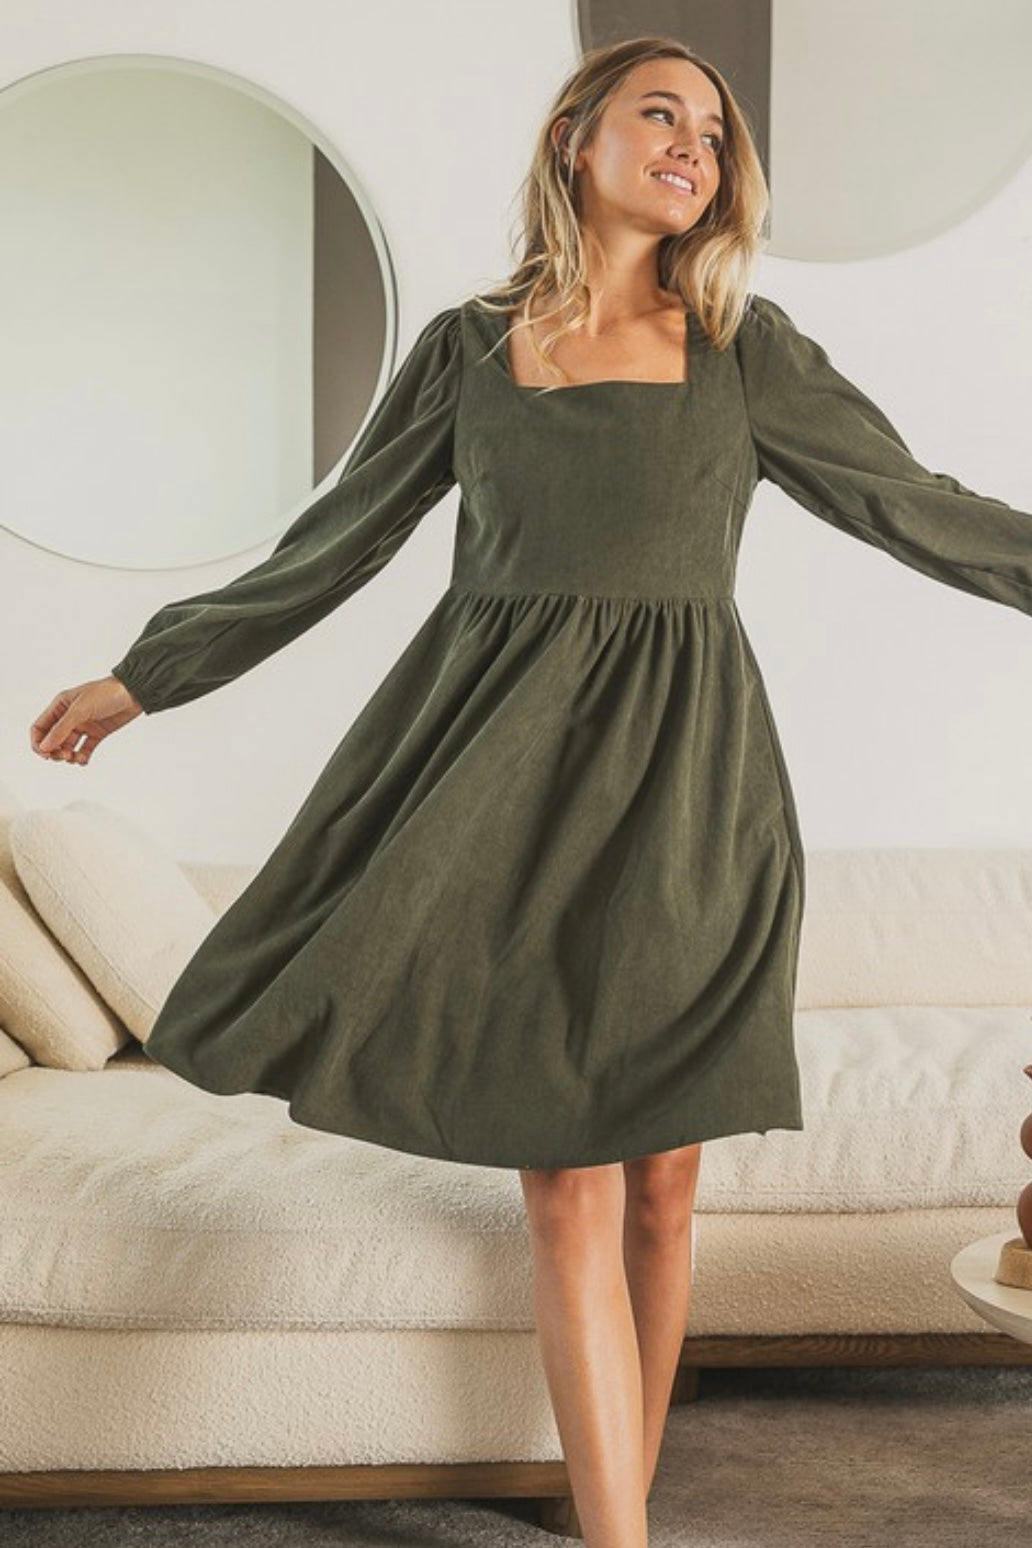 The Evelyn Corduroy Dress in 2 Colors